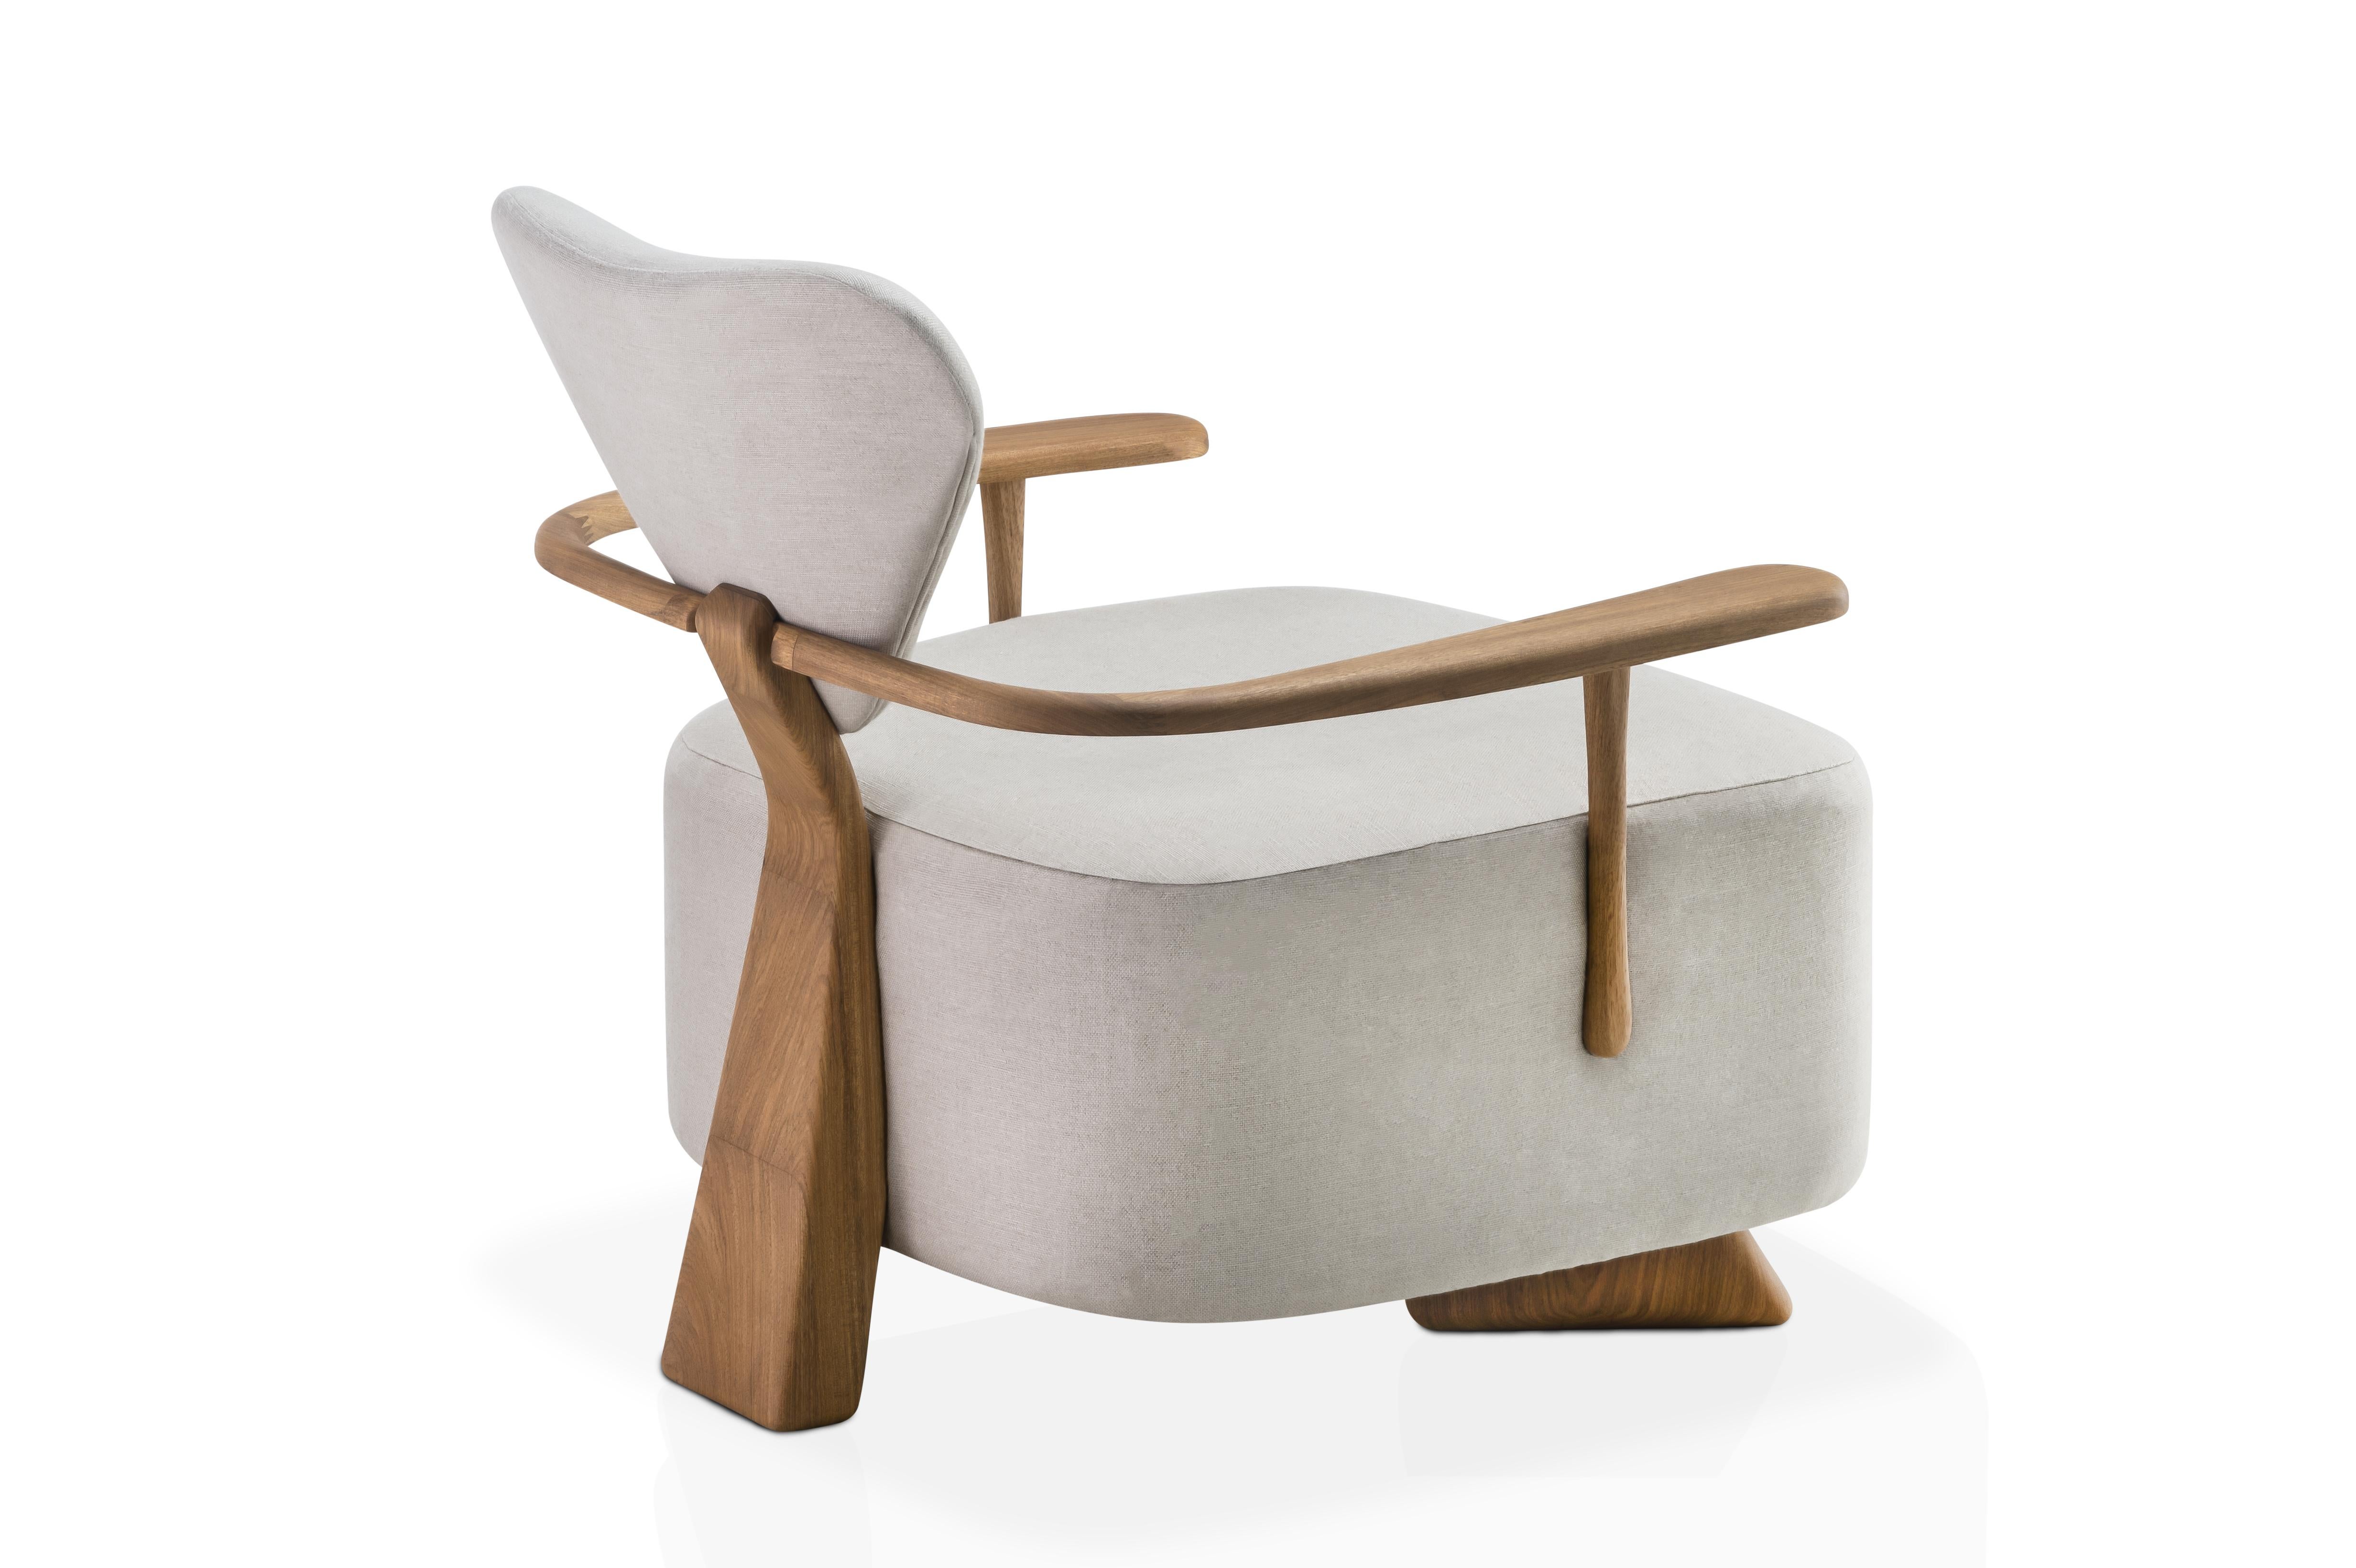 South American Contemporary Lounge Chair in Solid Brazilian Walnut Wood by Juliana Vasconcellos